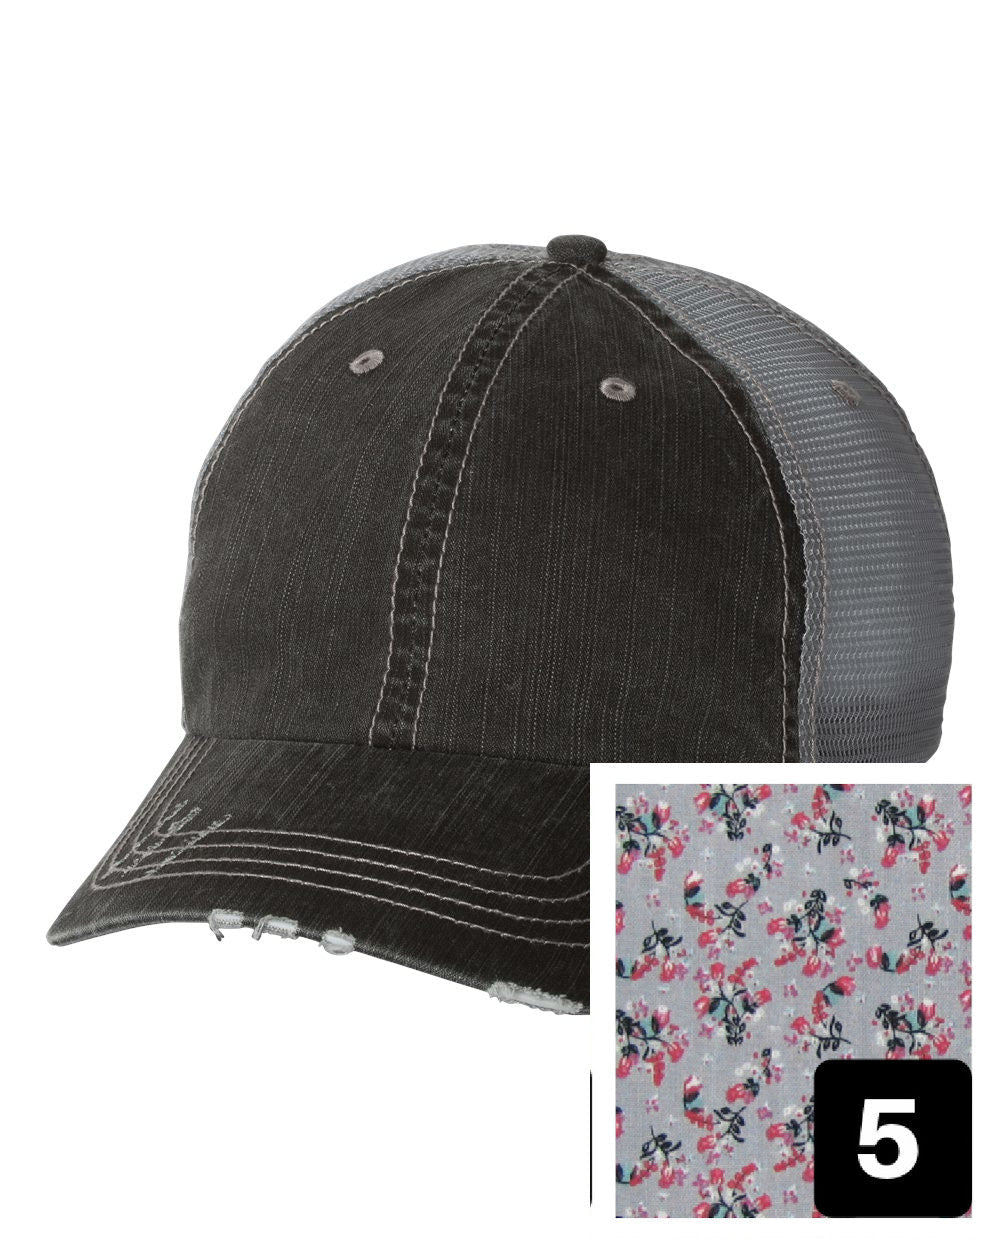 gray distressed trucker hat with purple and pink floral fabric state of Connecticut